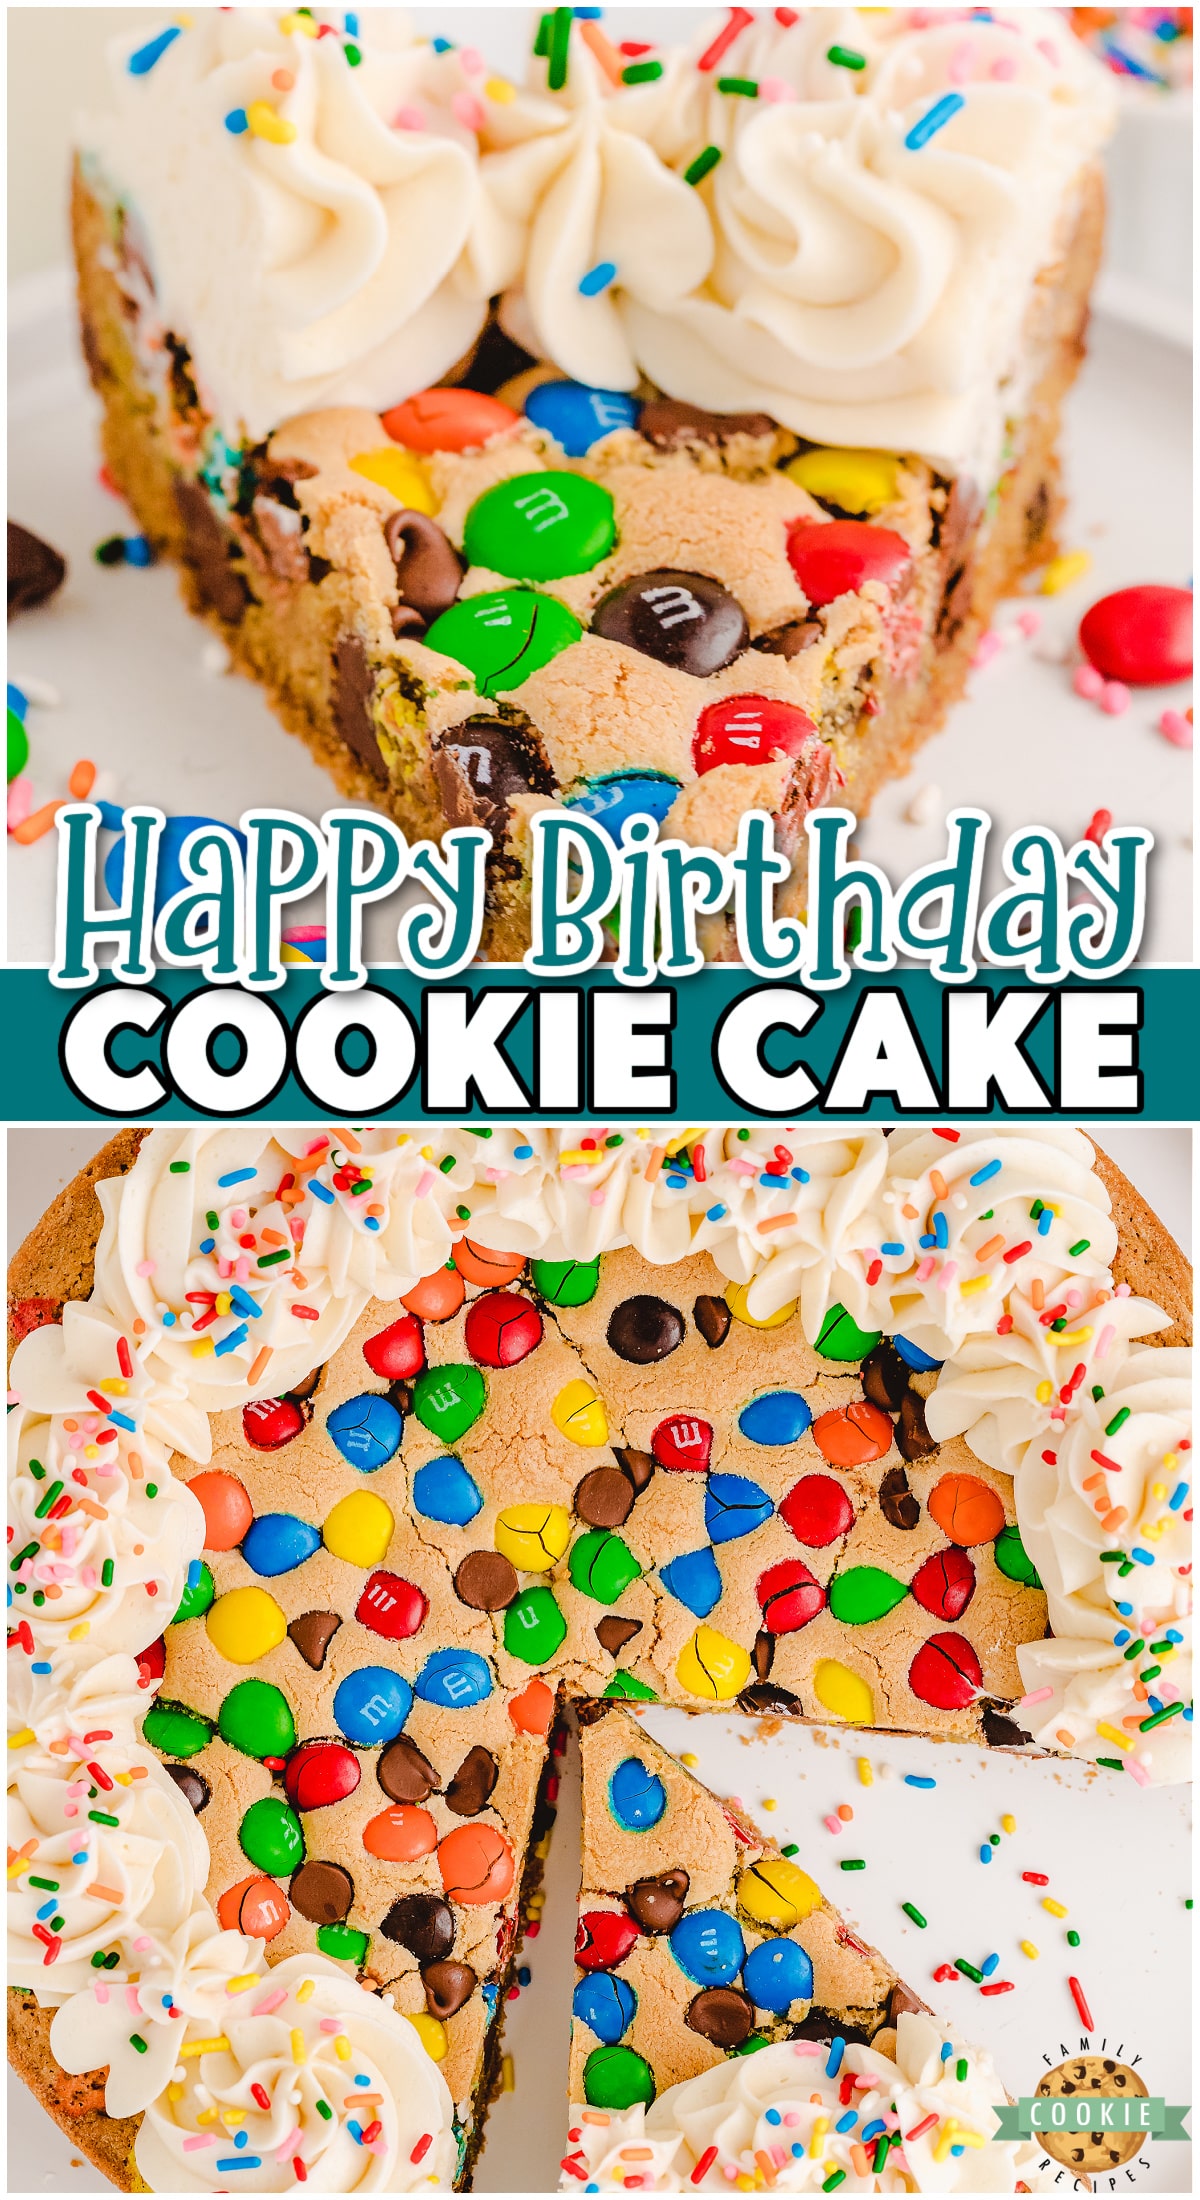 Birthday Cookie Cake that's a delightful dessert for your birthday! Soft, chewy birthday chocolate chip M&M cookie cake topped with buttercream frosting & sprinkles!